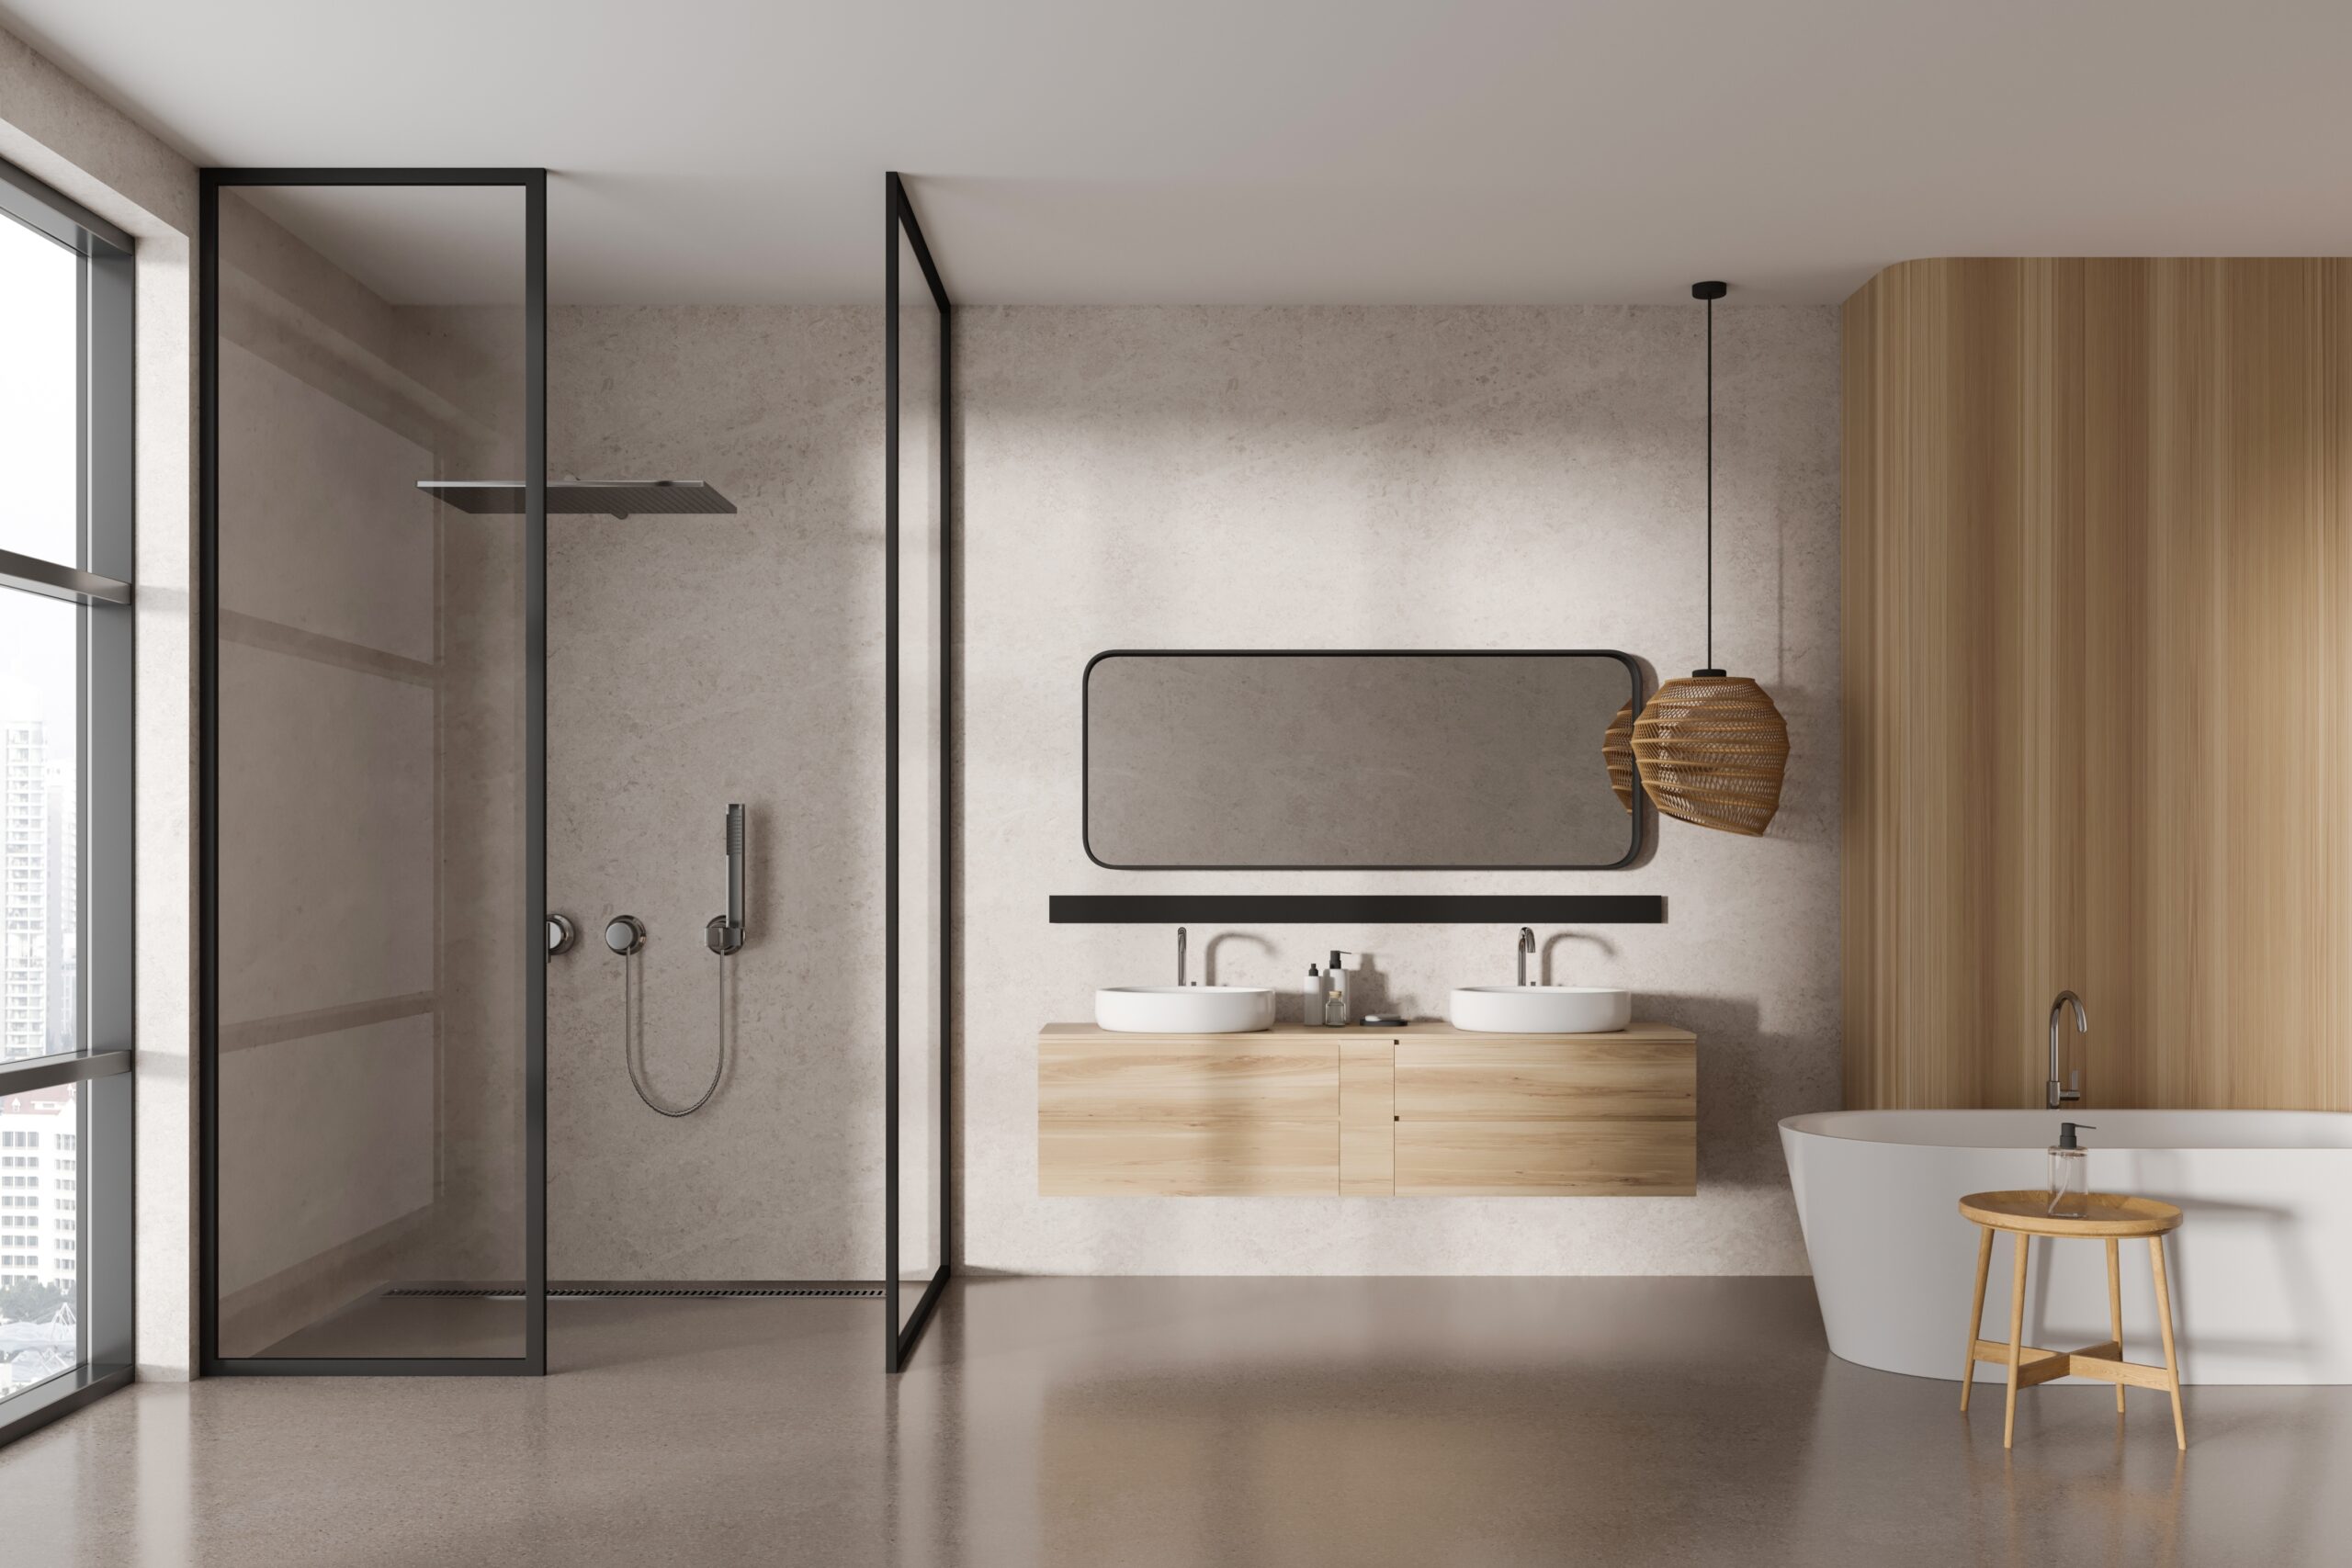 Interior,Of,Modern,Bathroom,With,White,And,Wooden,Walls,,Concrete